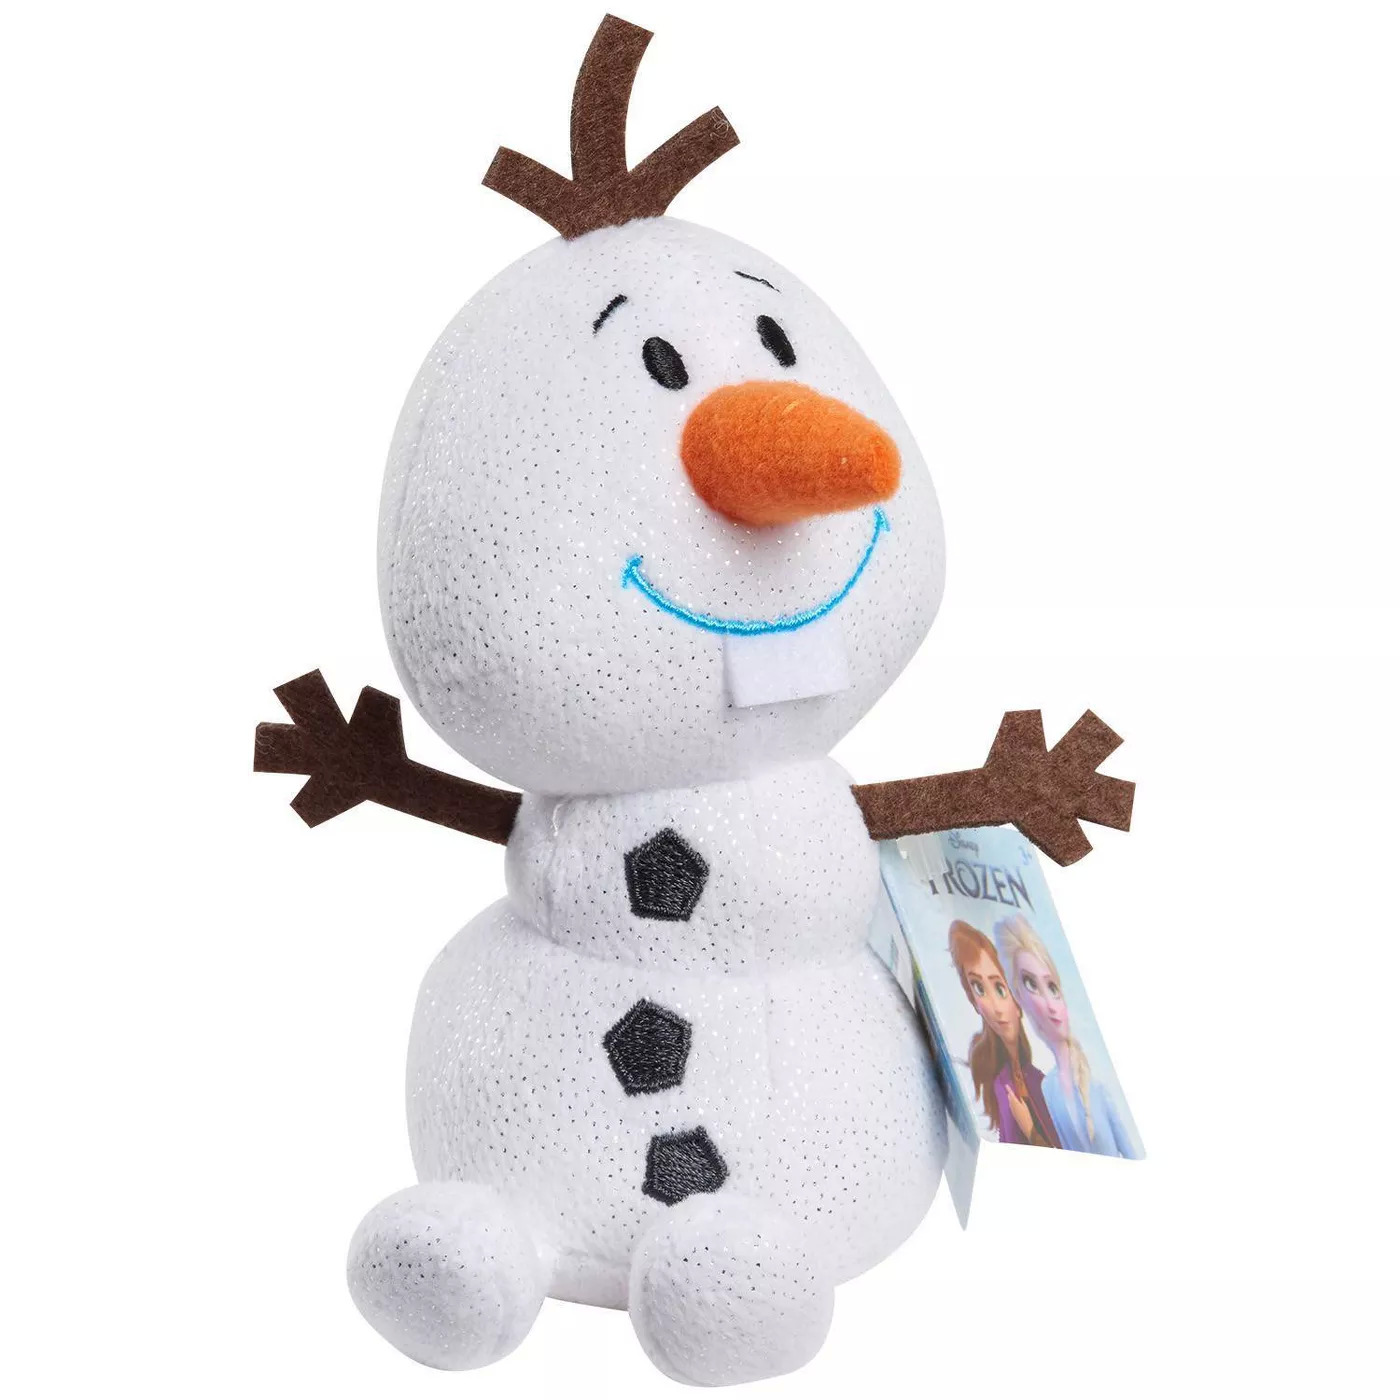 Disney Bean Plush Toys (various) 3 for $11.98 ($4 Each) + Free Store Pickup at Target or FS on $35+